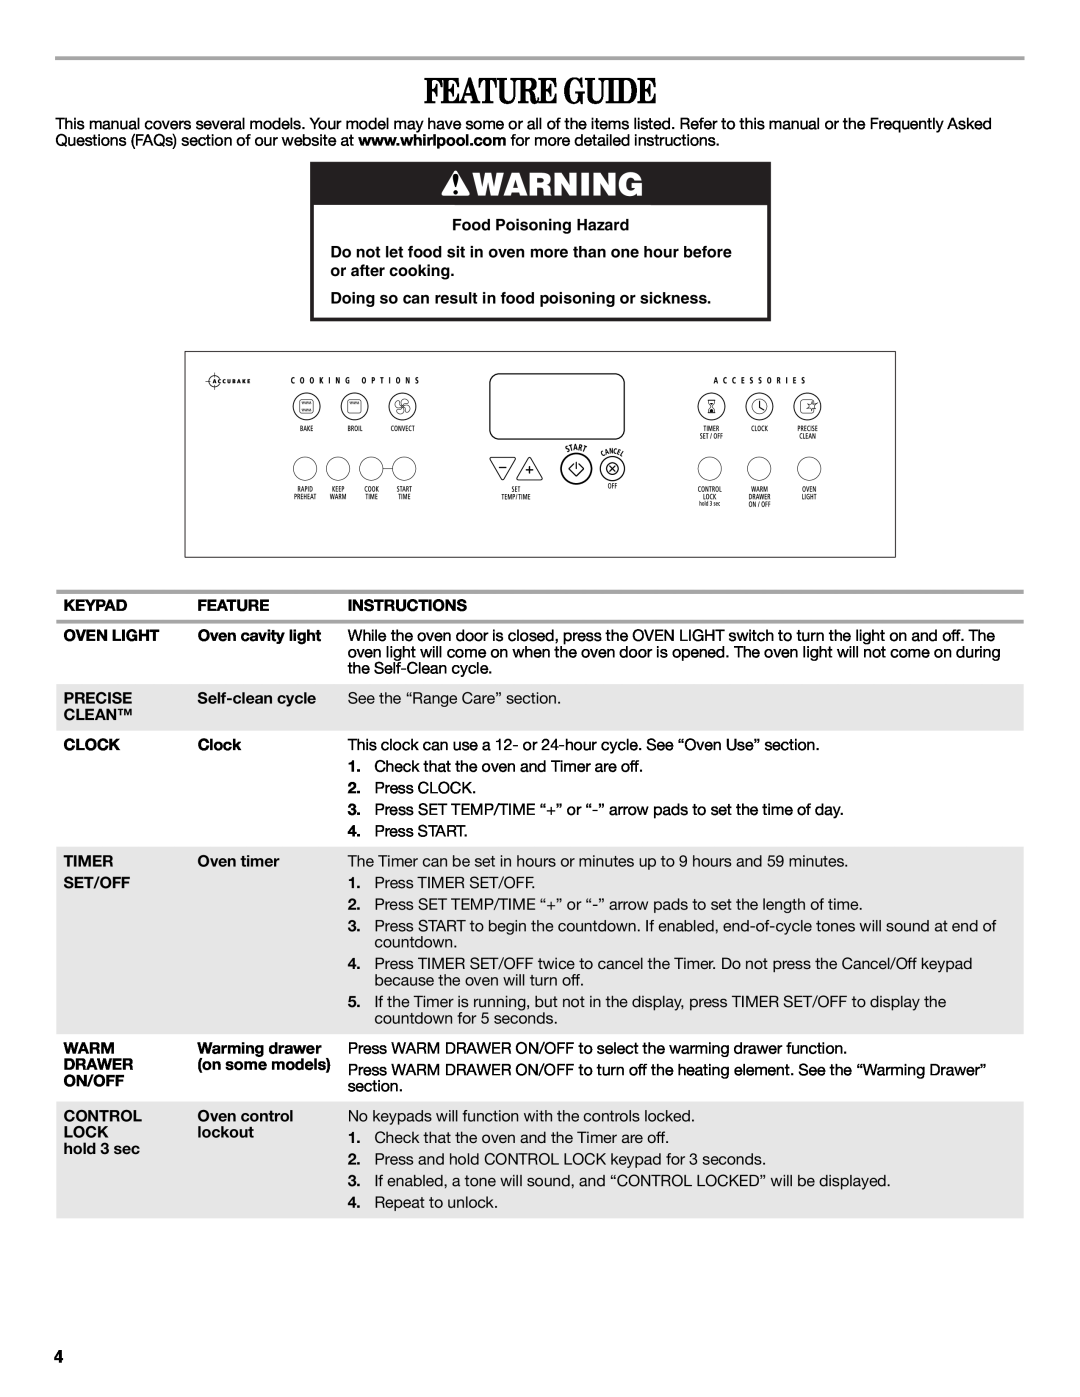 Whirlpool W10364877A, gas range Feature Guide, Food Poisoning Hazard, Doing so can result in food poisoning or sickness 